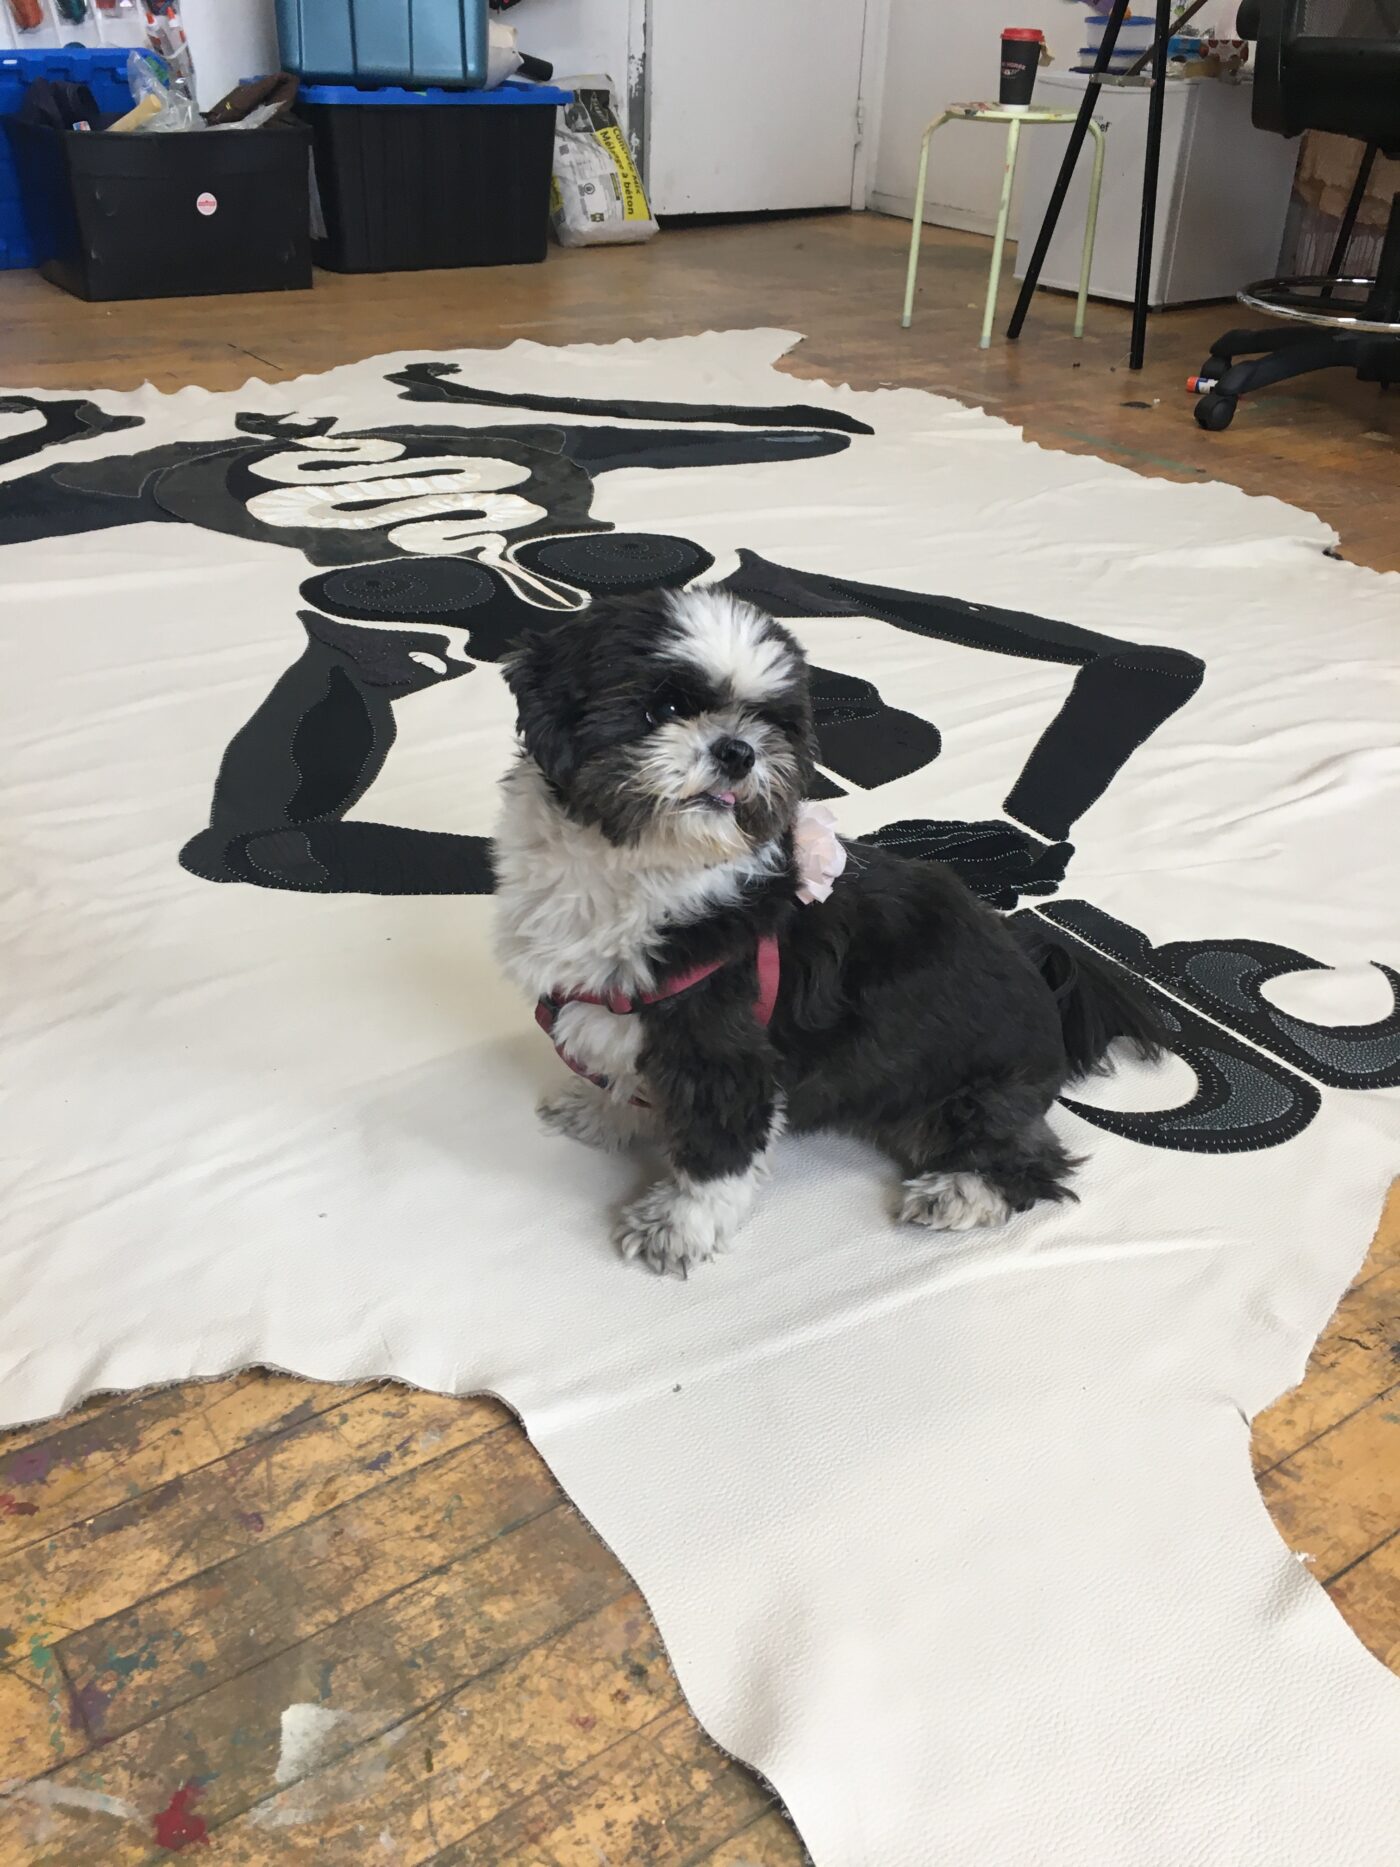 Image shows a small black and white dog sitting on top of a large painted textile which is displayed across a hardwood floor.